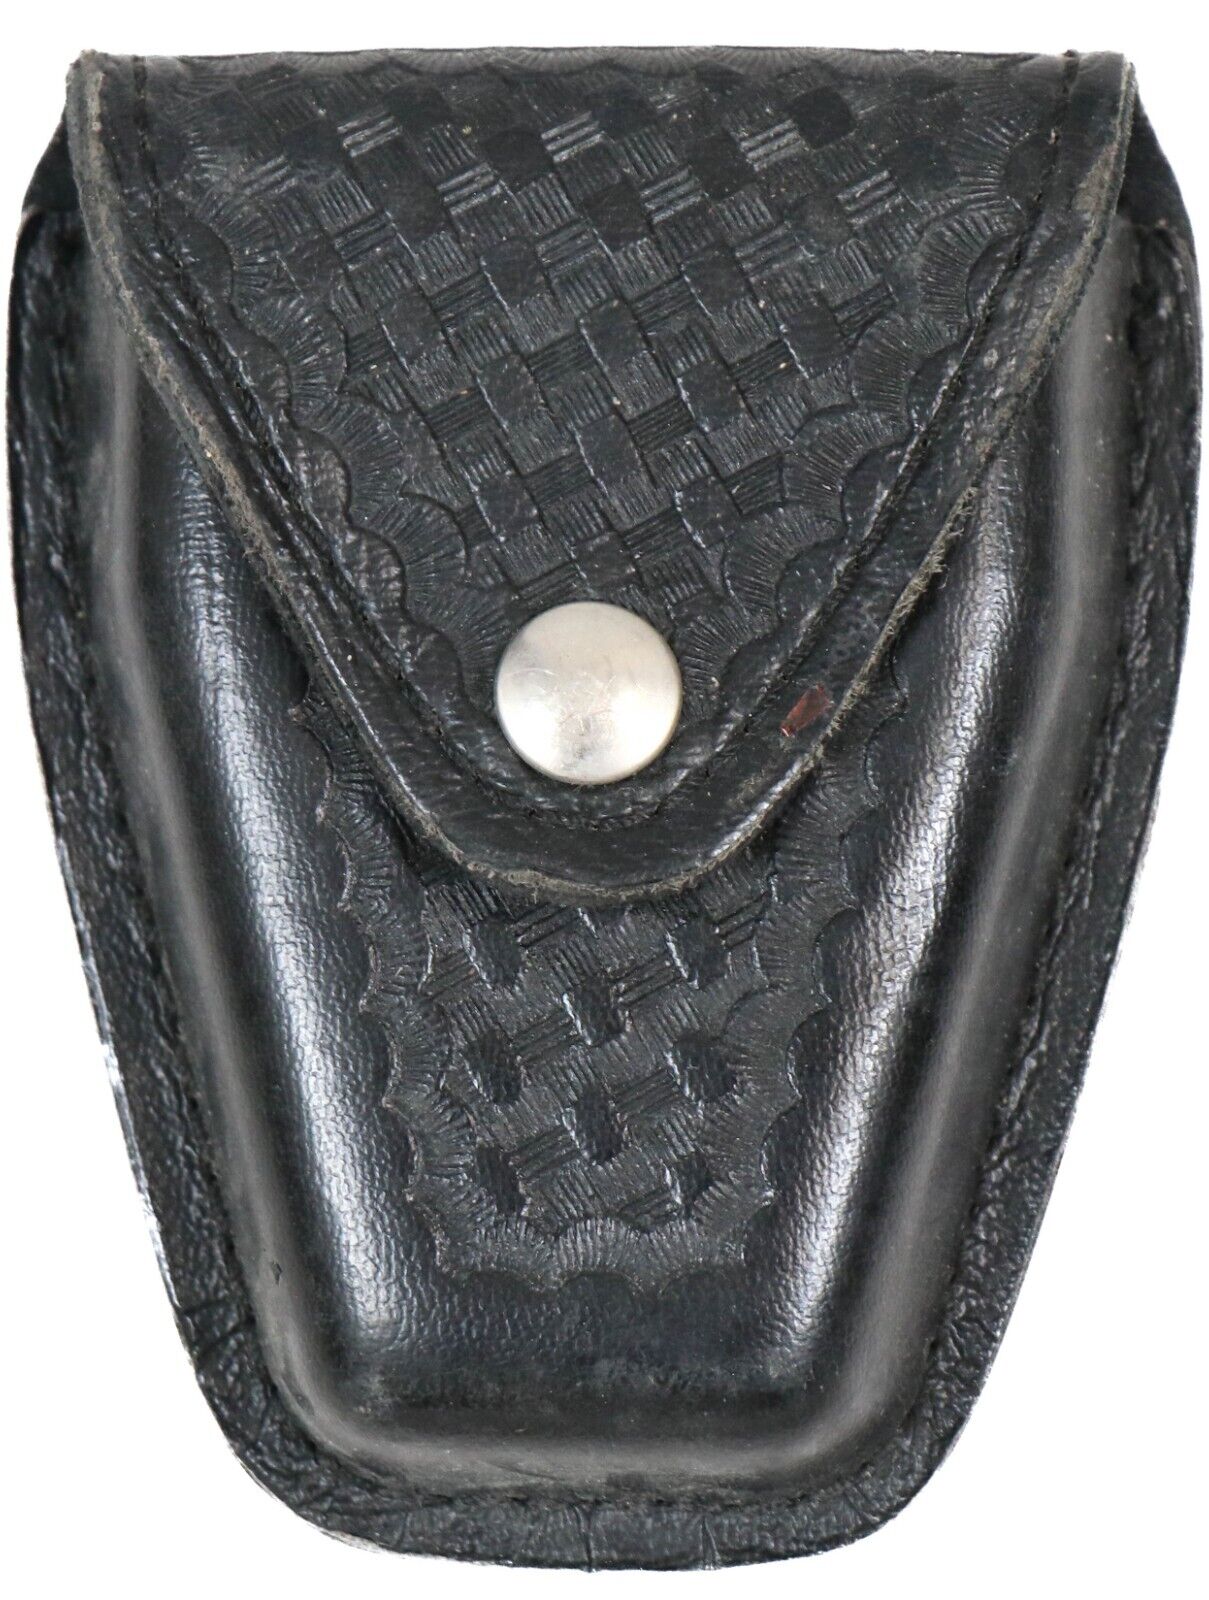 Safariland 190-4 Black Basketweave Leather Snap Top Flap Chain Handcuff Pouch